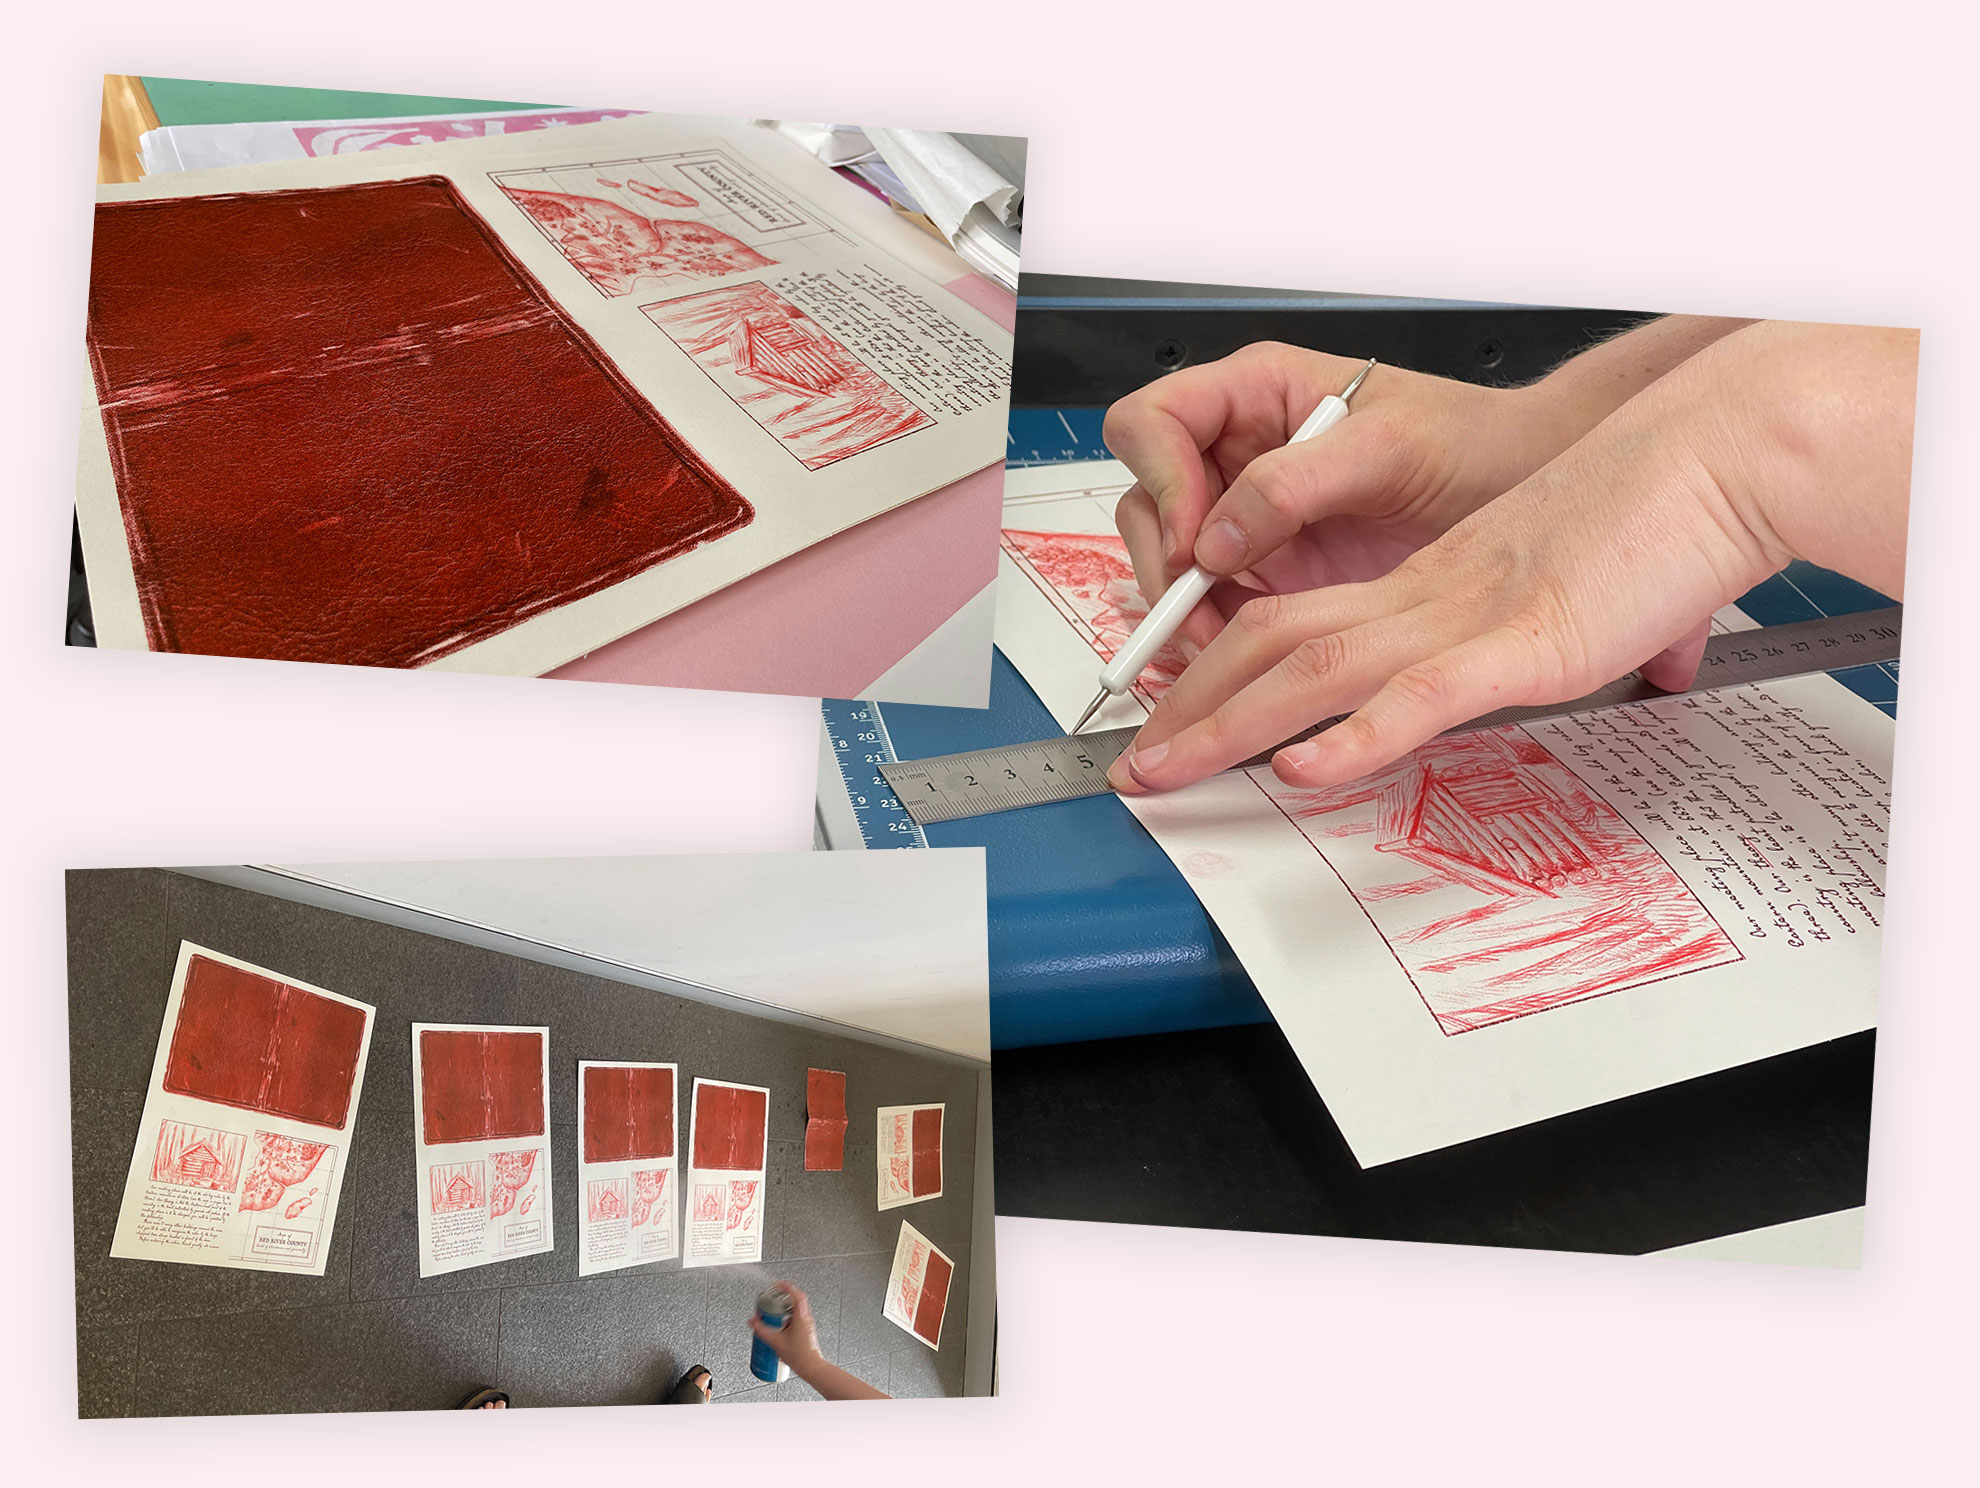 Photos of the print and binding process.